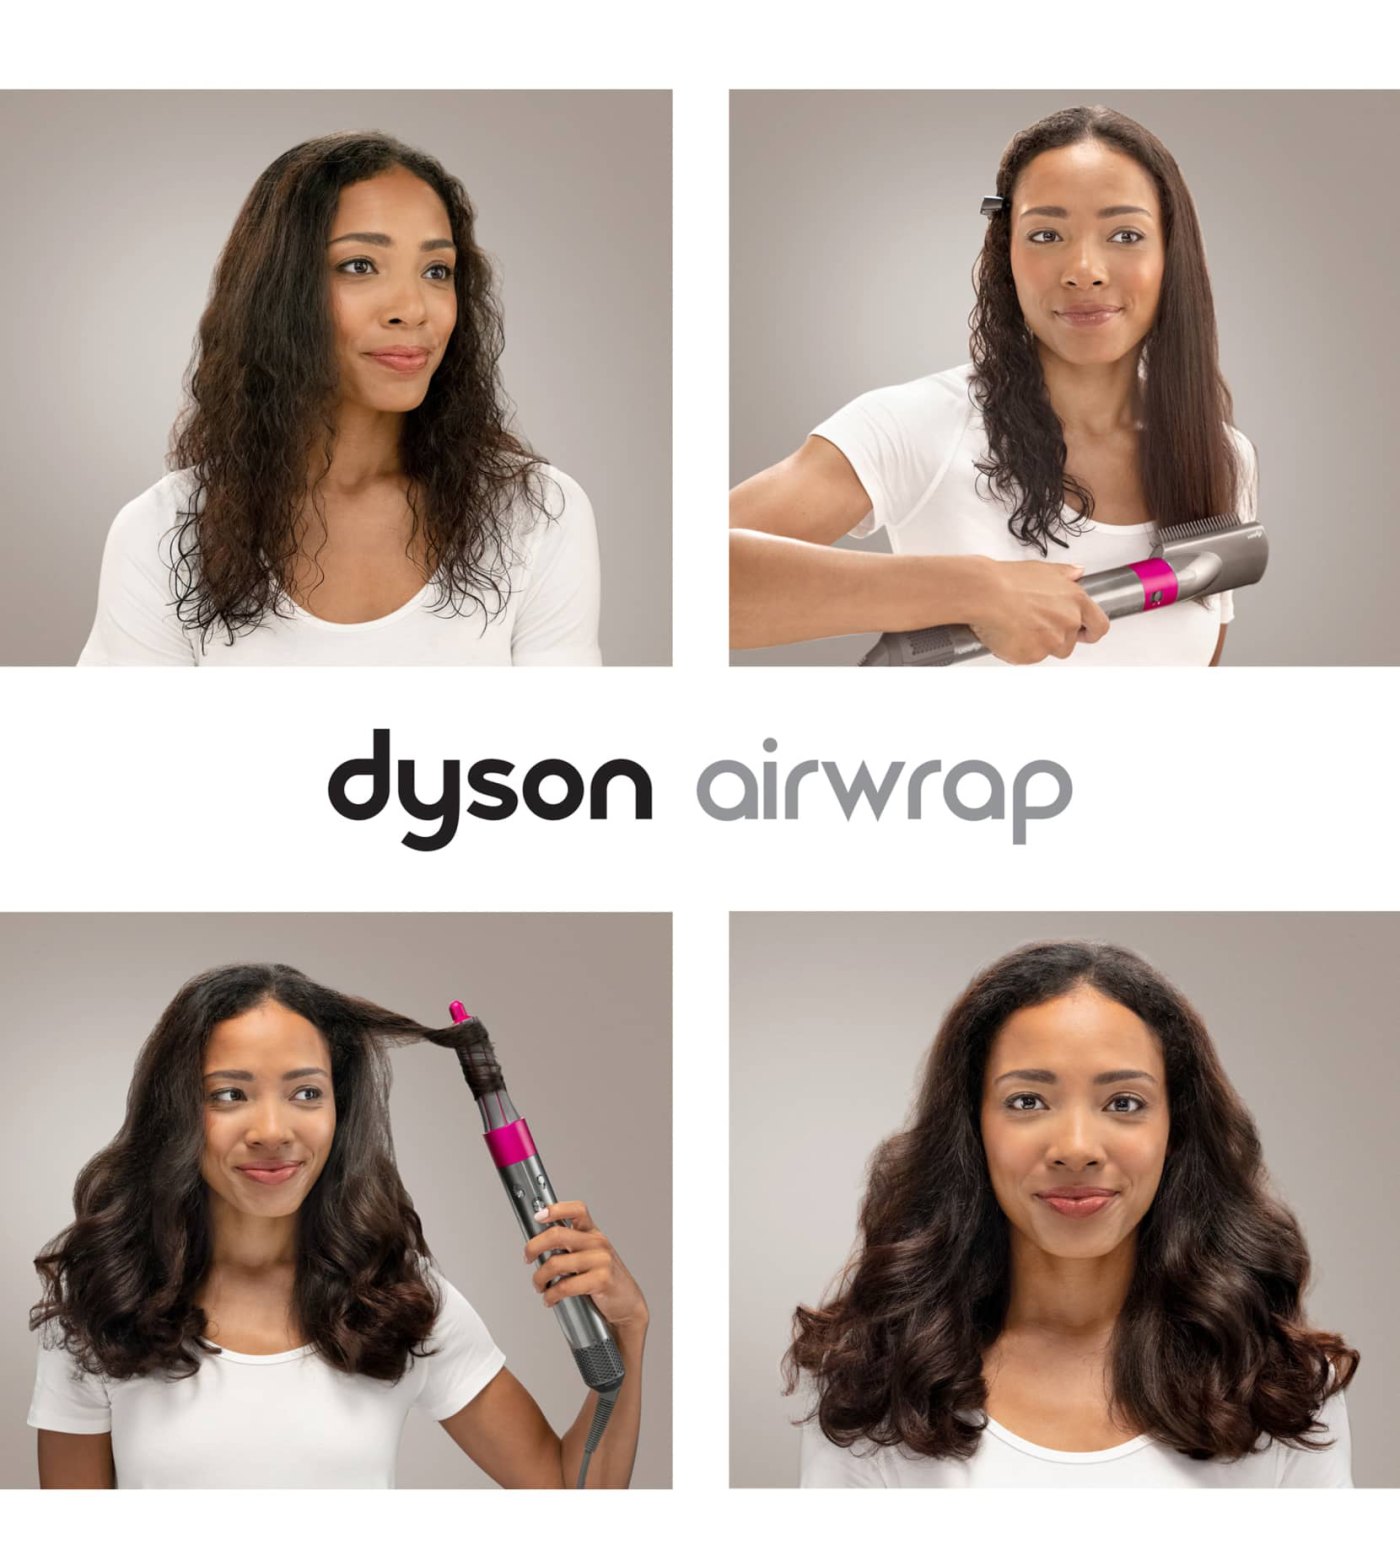 Dyson's New Airwrap Can Style and Dry Hair Simultaneously